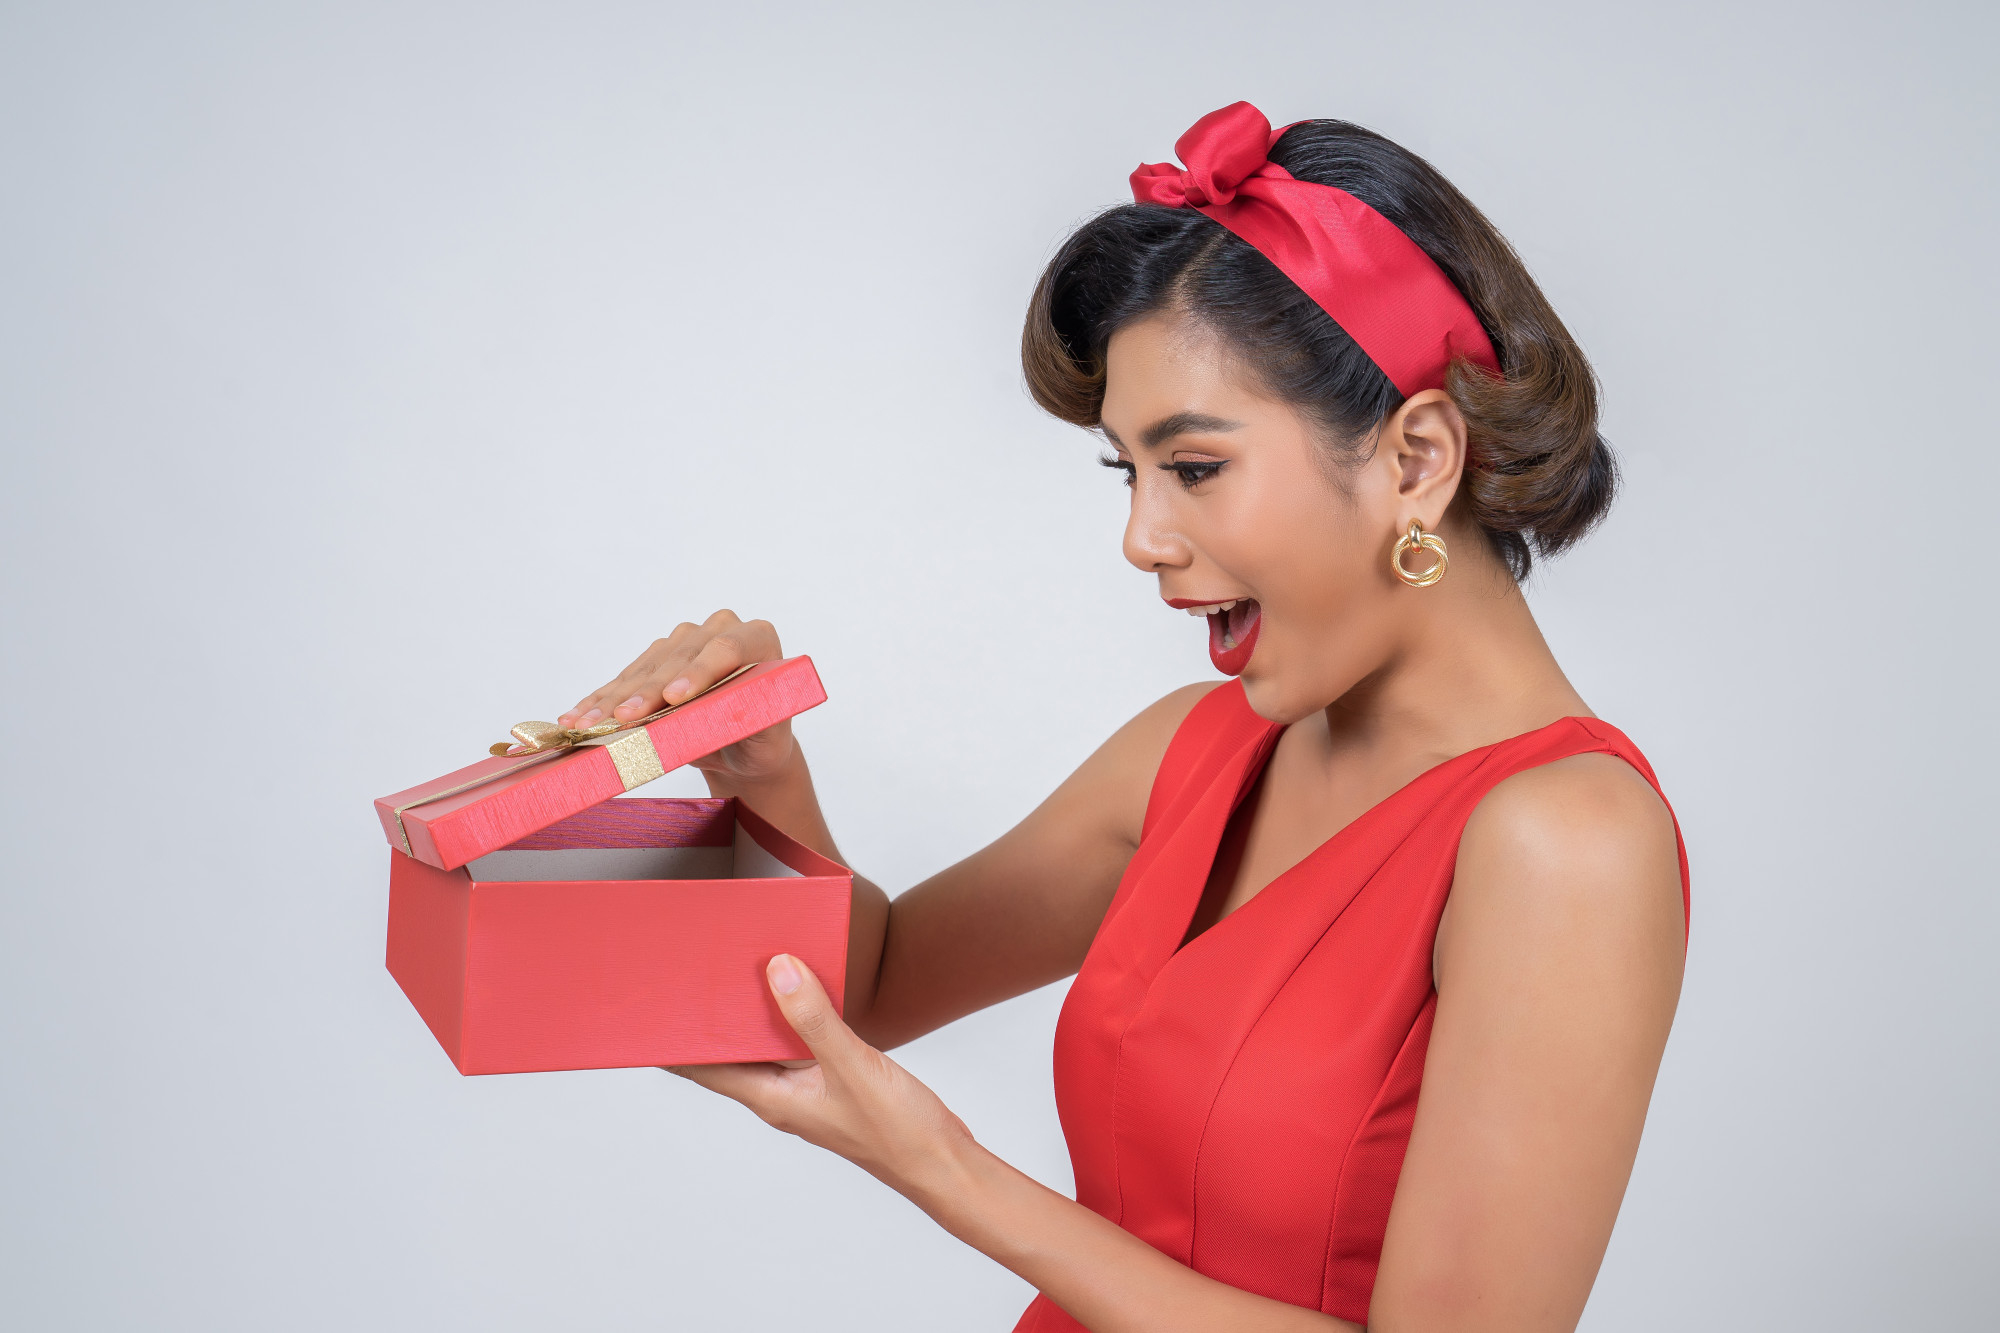 A surprised woman reacting to a gift | Source: Freepik